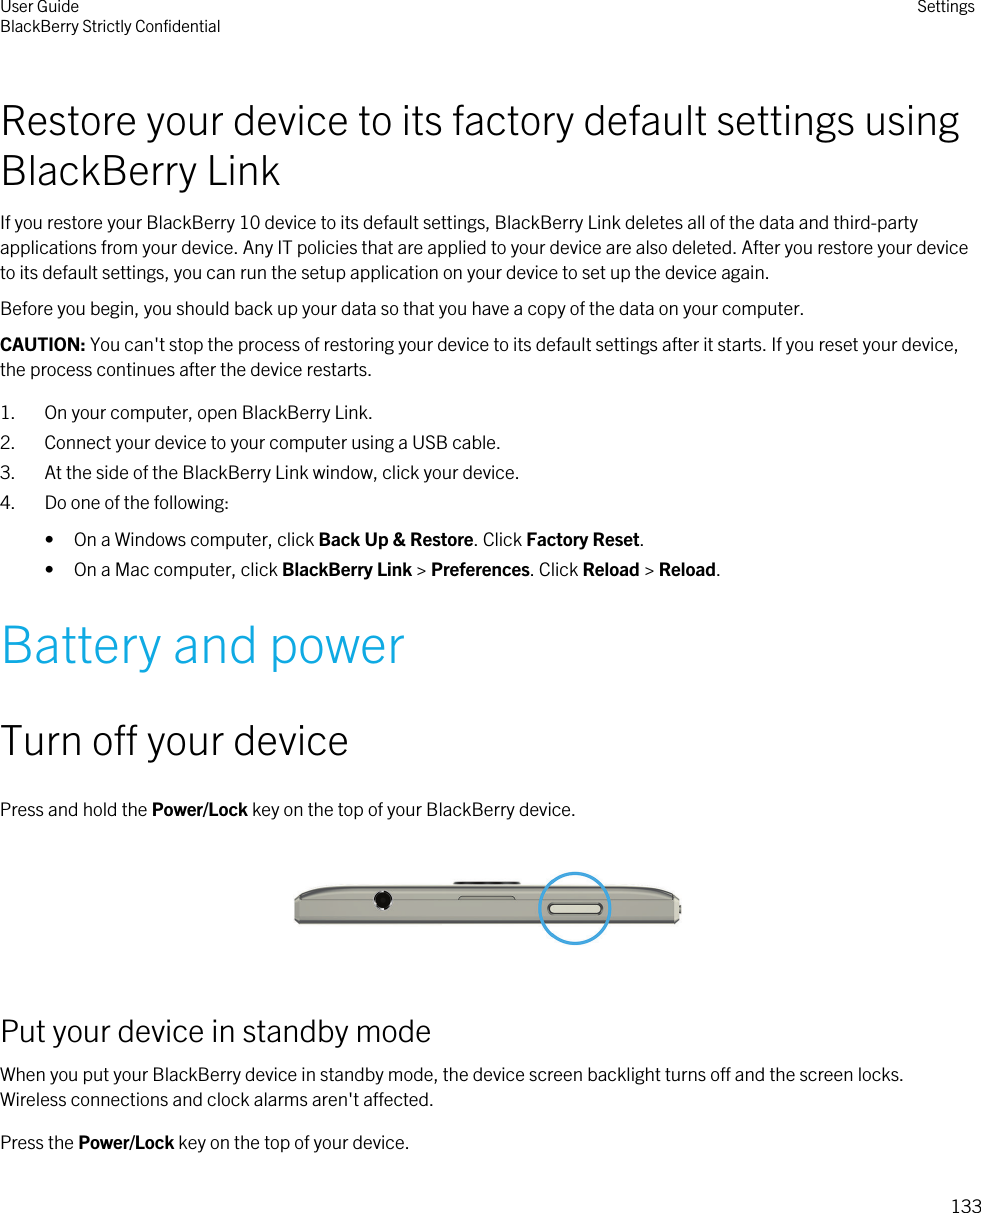 Restore your device to its factory default settings using BlackBerry LinkIf you restore your BlackBerry 10 device to its default settings, BlackBerry Link deletes all of the data and third-party applications from your device. Any IT policies that are applied to your device are also deleted. After you restore your device to its default settings, you can run the setup application on your device to set up the device again.Before you begin, you should back up your data so that you have a copy of the data on your computer.CAUTION: You can&apos;t stop the process of restoring your device to its default settings after it starts. If you reset your device, the process continues after the device restarts.1. On your computer, open BlackBerry Link.2. Connect your device to your computer using a USB cable.3. At the side of the BlackBerry Link window, click your device.4. Do one of the following:• On a Windows computer, click Back Up &amp; Restore. Click Factory Reset.• On a Mac computer, click BlackBerry Link &gt; Preferences. Click Reload &gt; Reload.Battery and powerTurn off your devicePress and hold the Power/Lock key on the top of your BlackBerry device.  Put your device in standby modeWhen you put your BlackBerry device in standby mode, the device screen backlight turns off and the screen locks. Wireless connections and clock alarms aren&apos;t affected.Press the Power/Lock key on the top of your device.User GuideBlackBerry Strictly Confidential Settings133